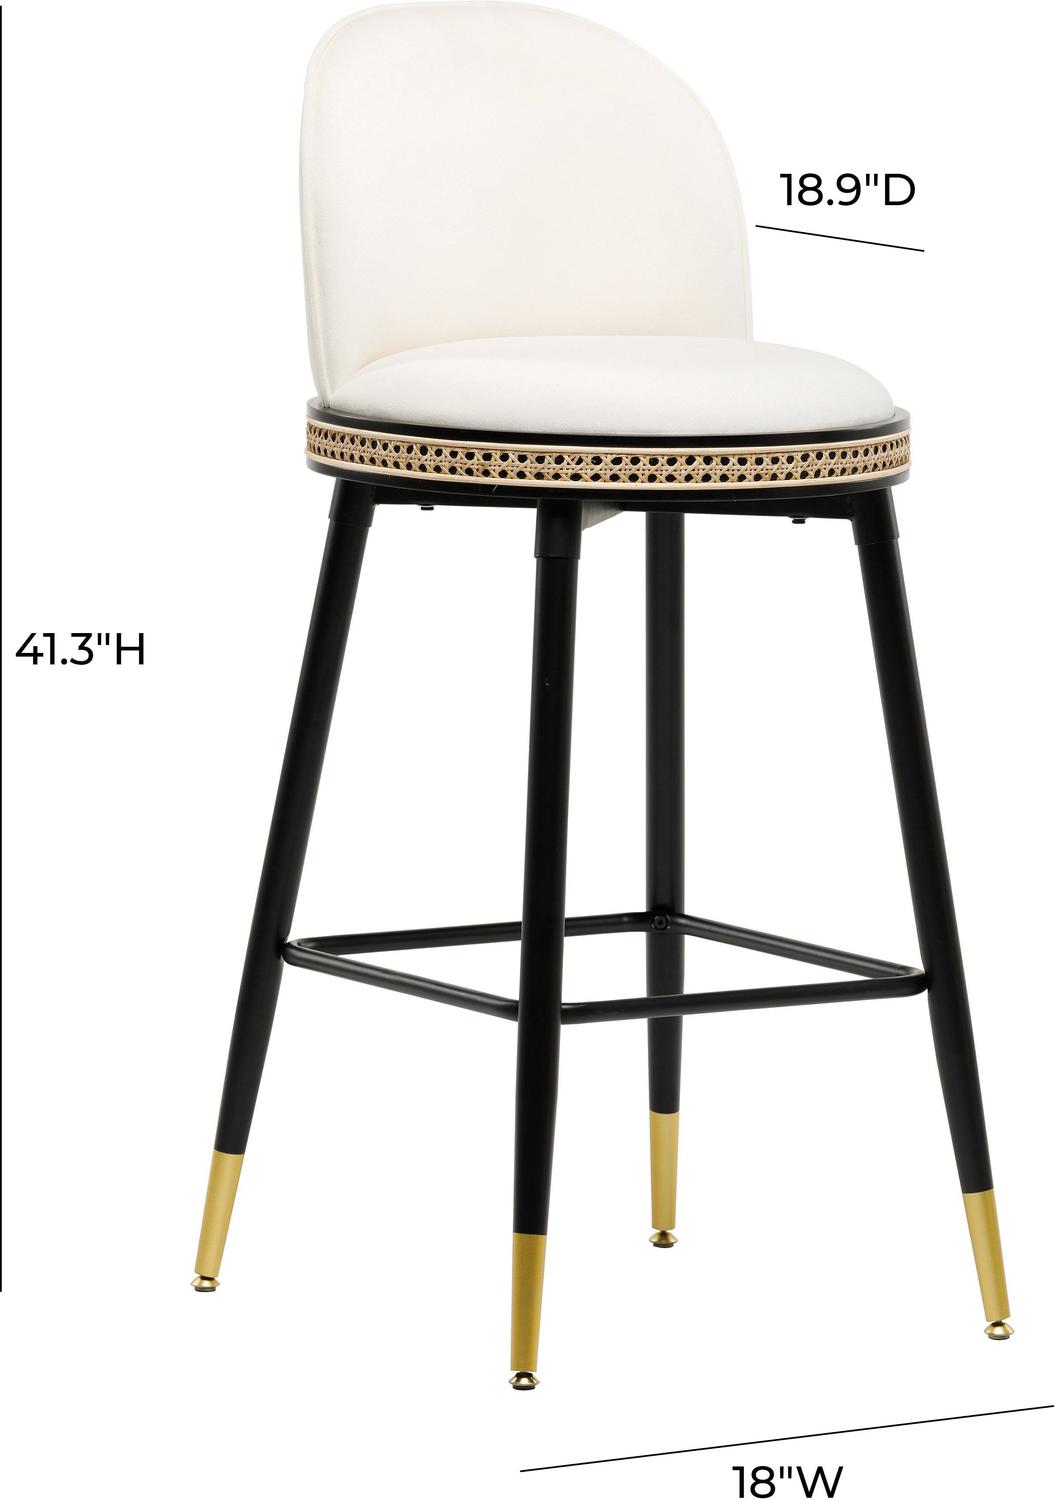 counter high chairs with arms Contemporary Design Furniture Stools Cream